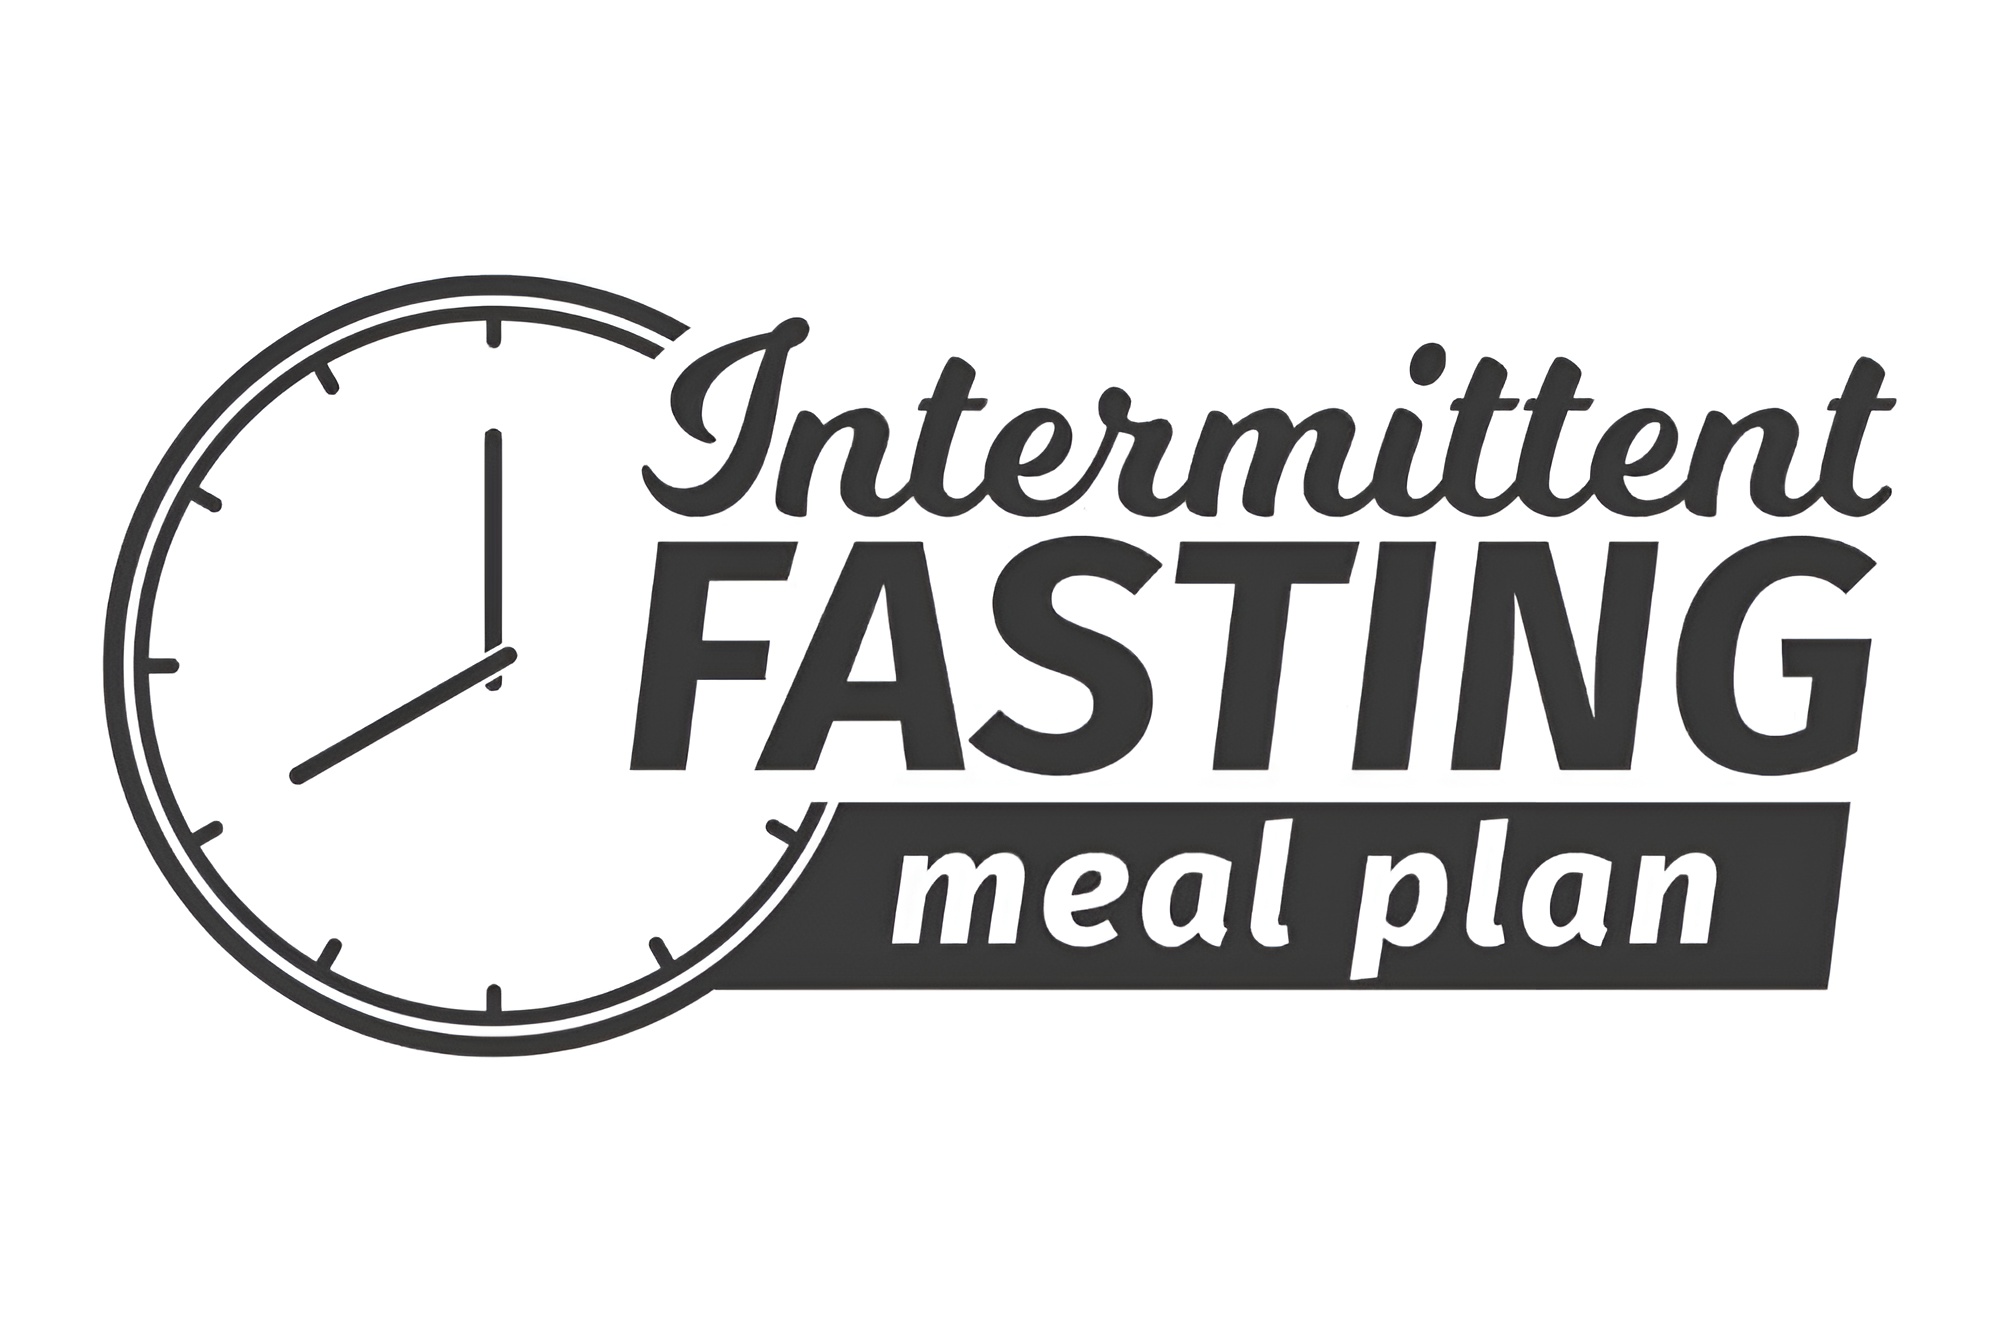 Intermittent fasting meal pl